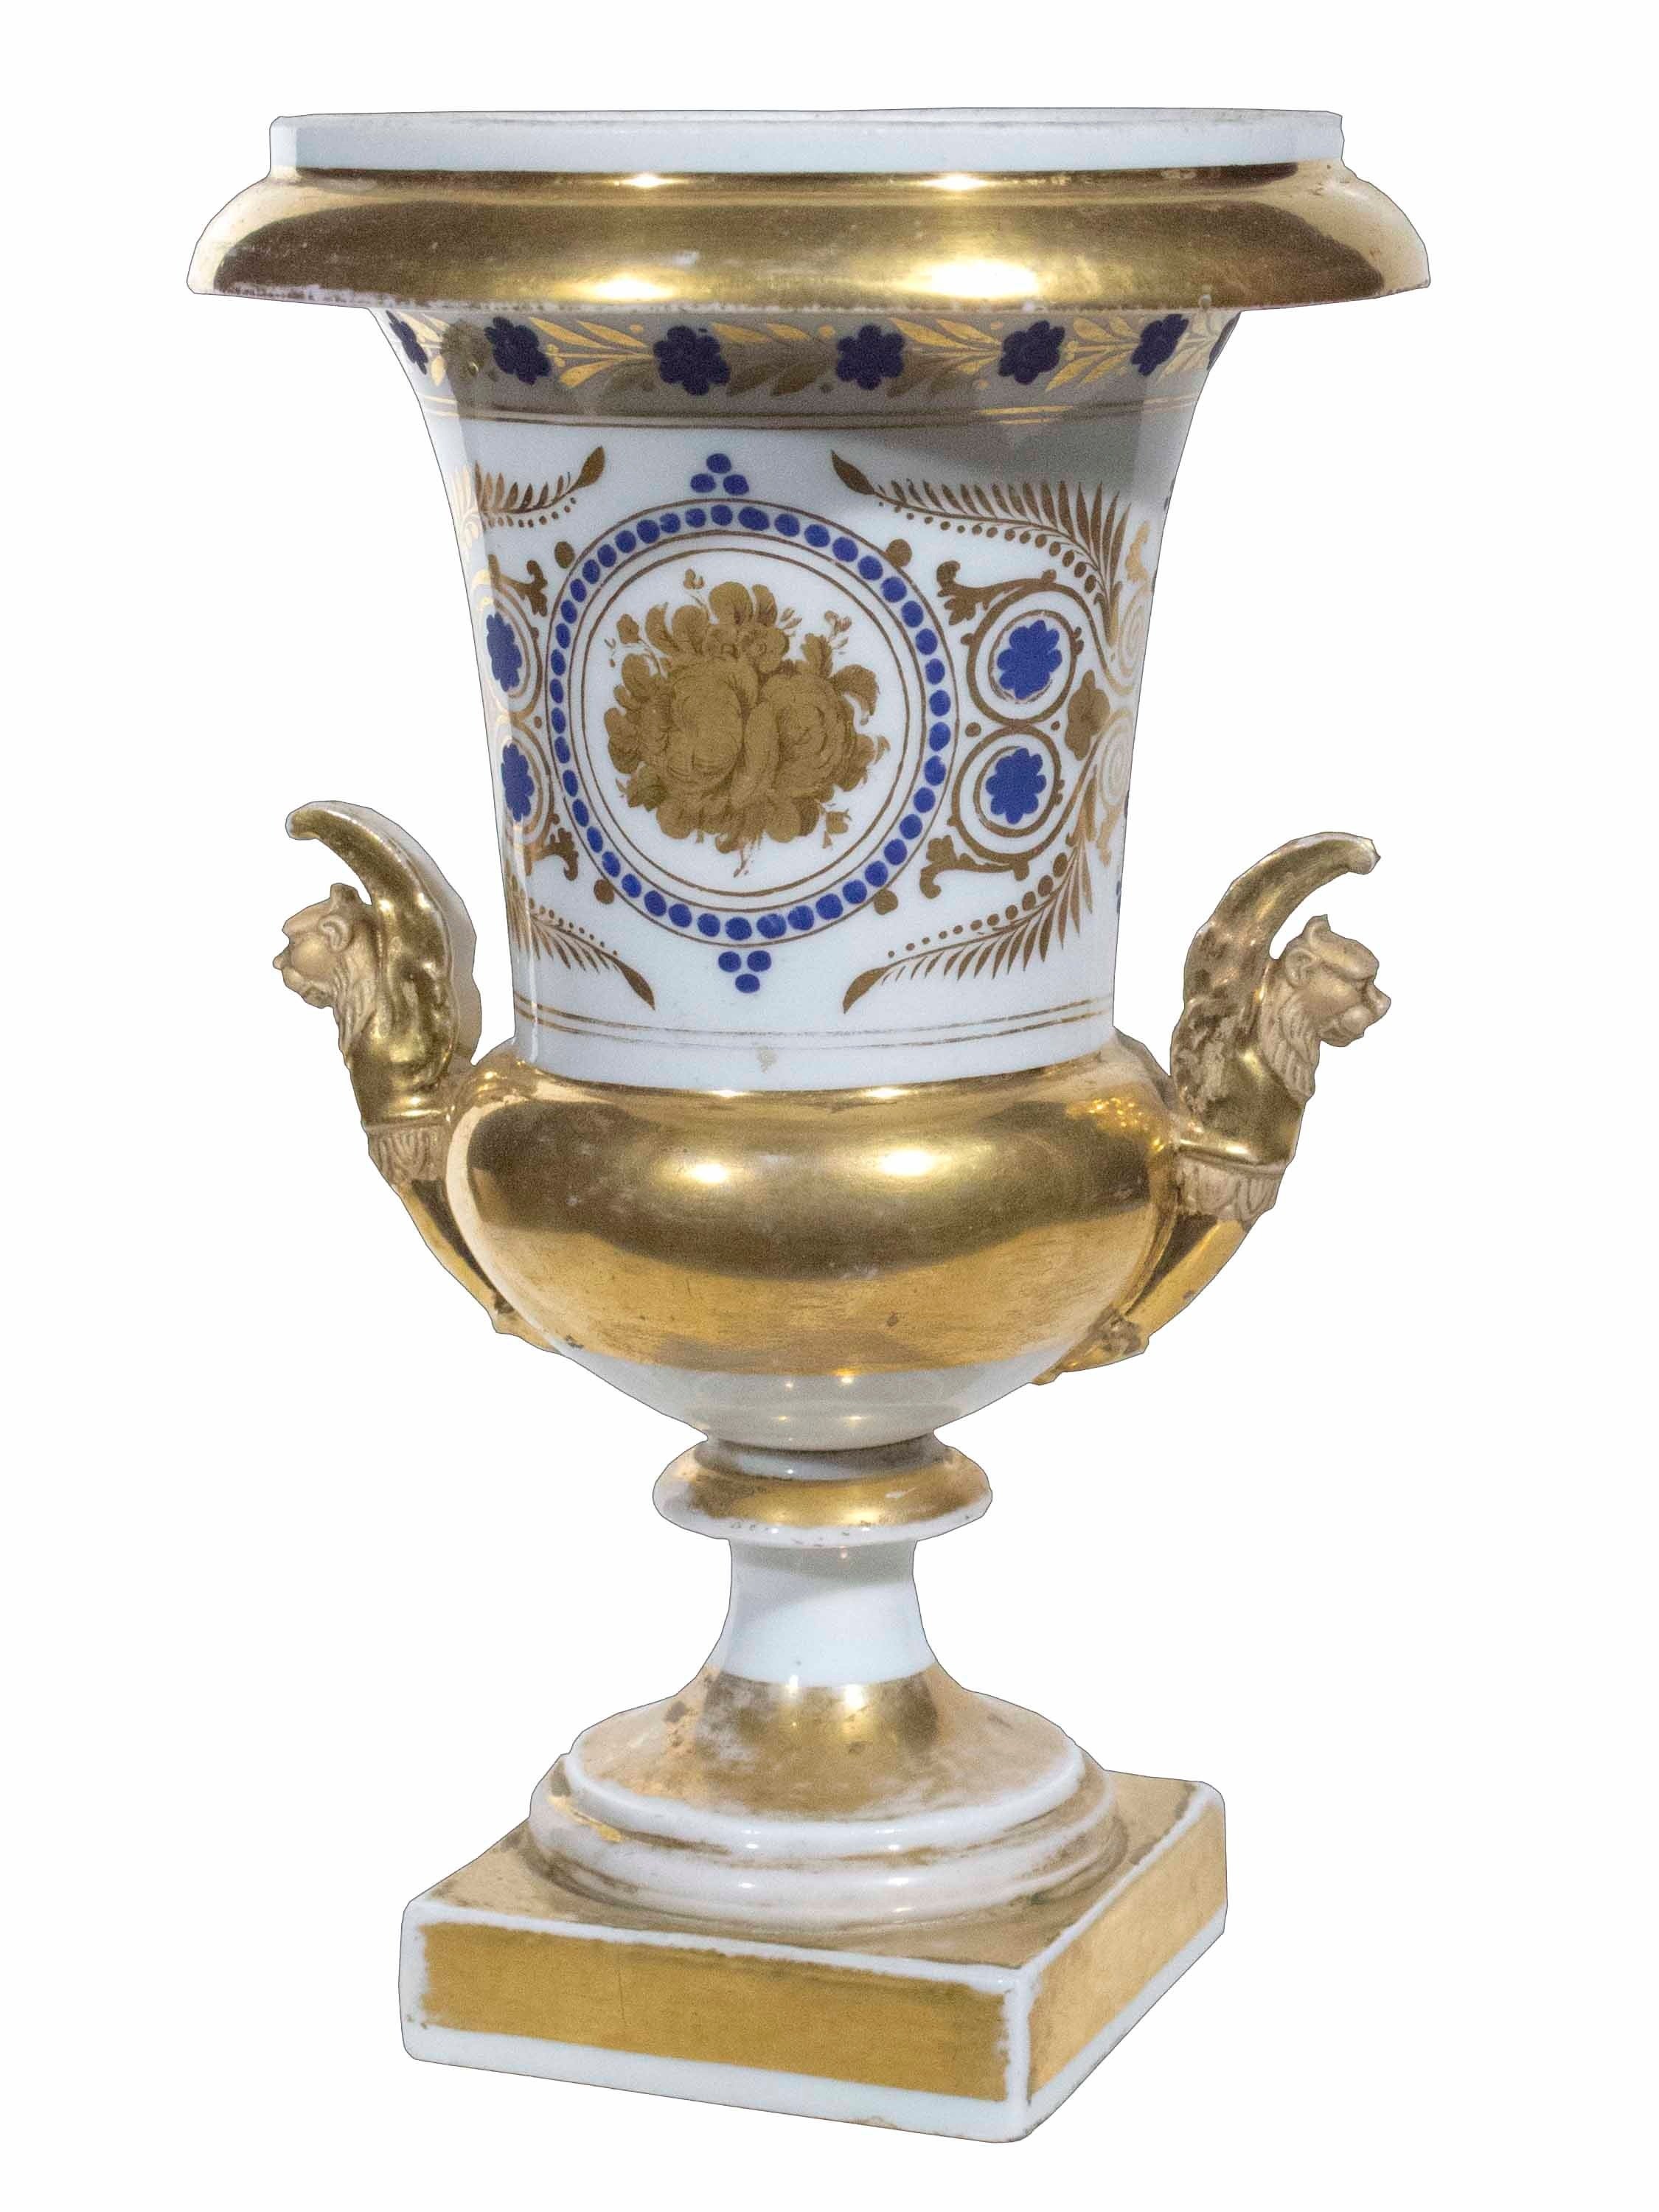 Refined Paris Porcelain Urn, Early 19th Century For Sale